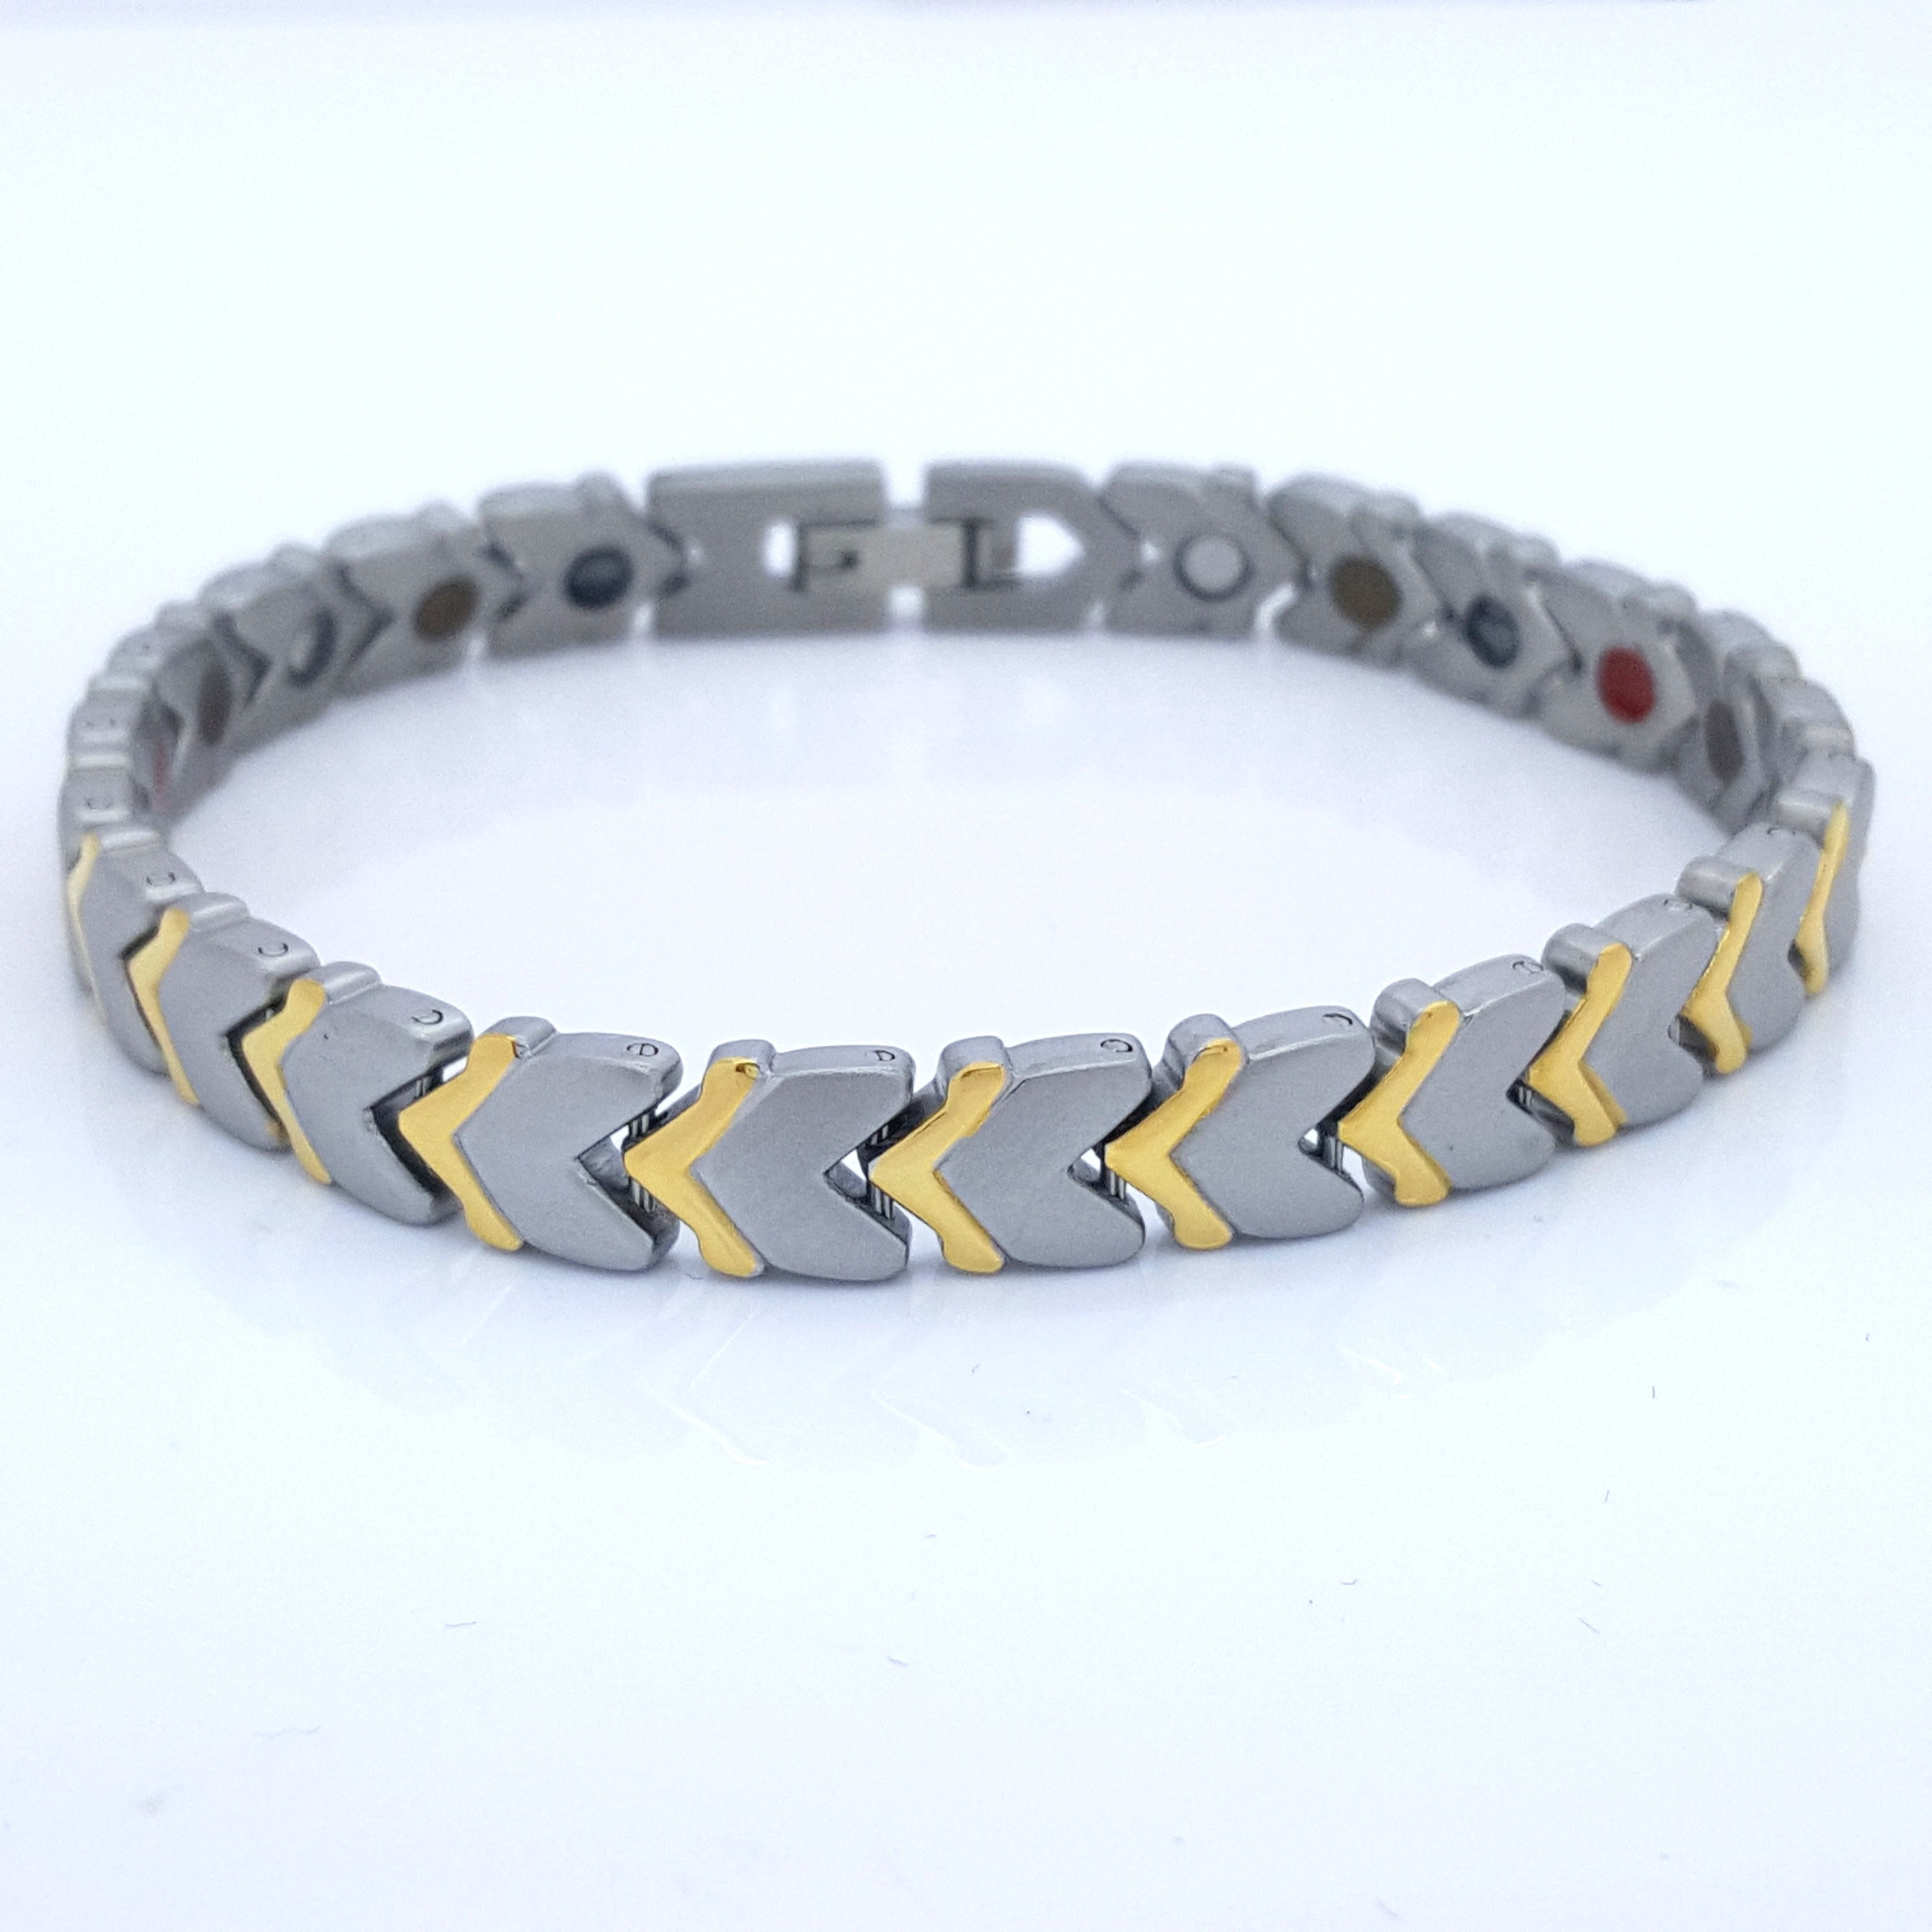 Buy Magnetic Bracelet Hijet Elegant Titanium Magnetic Therapy Bracelet  Stainless Steel Double Row for Male Pain Relief for Arthritis Online in  India - Etsy